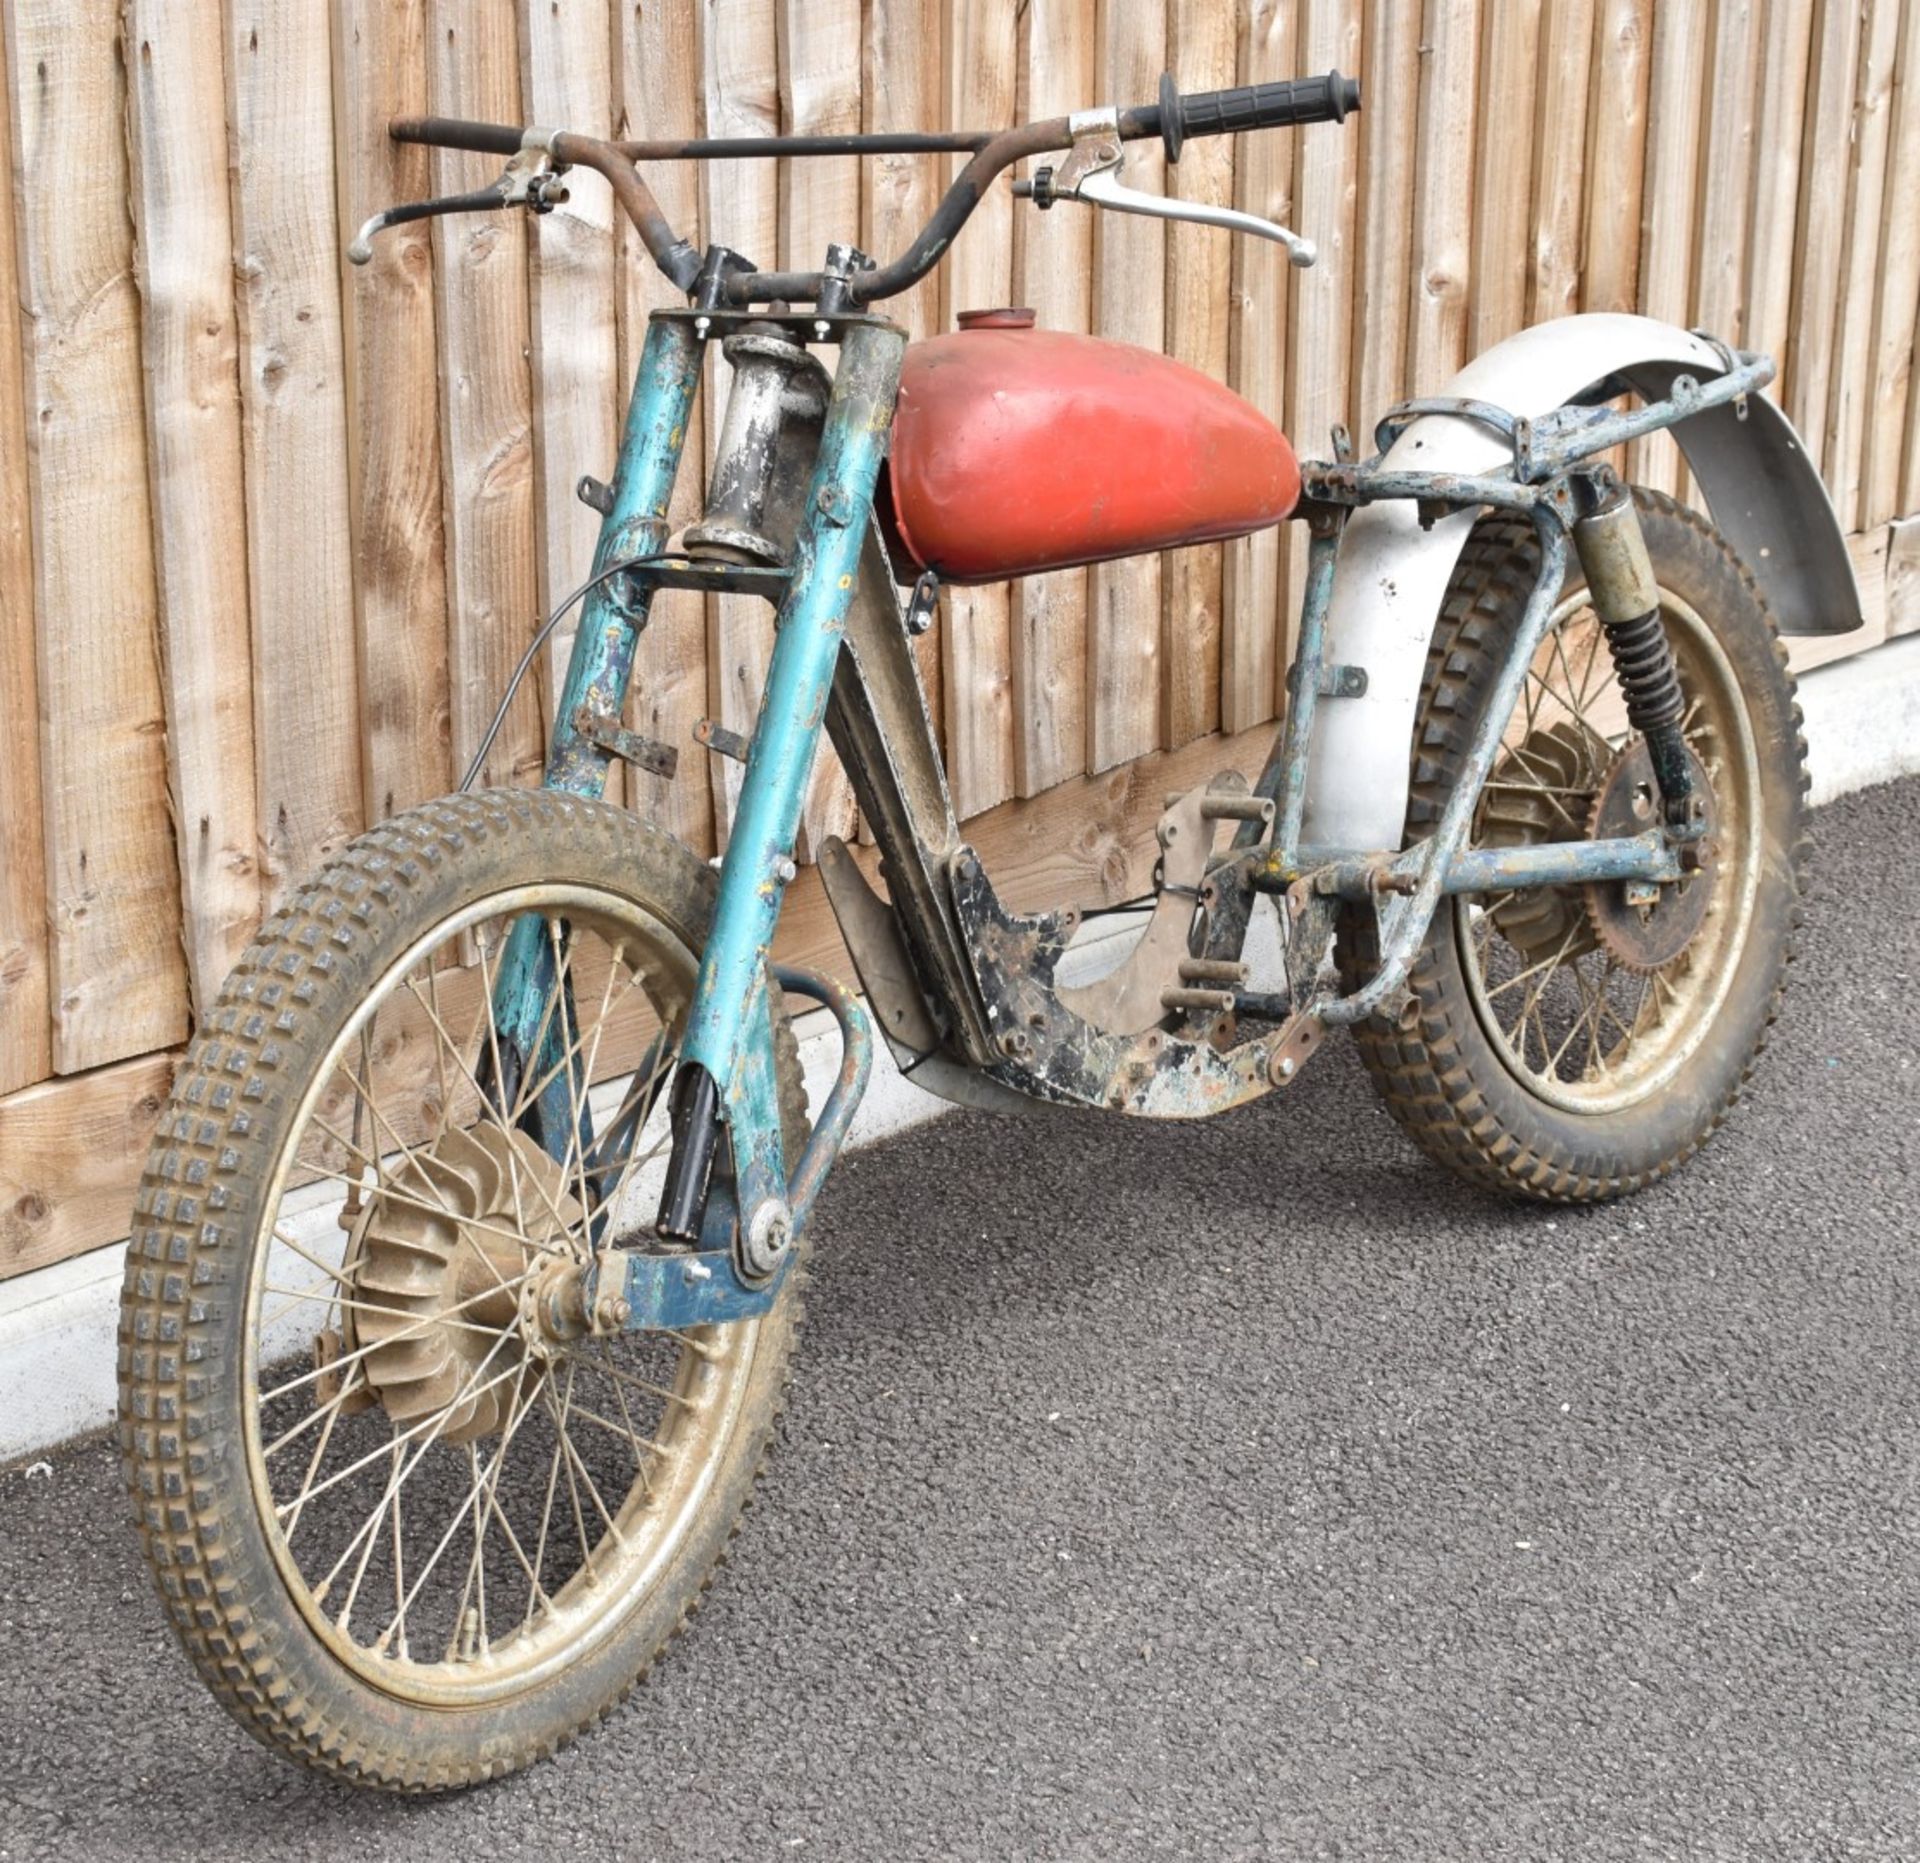 Greeves trials motorcycle, frame number 9146/TA 10%+VAT buyer's premium on this lot - Image 5 of 13